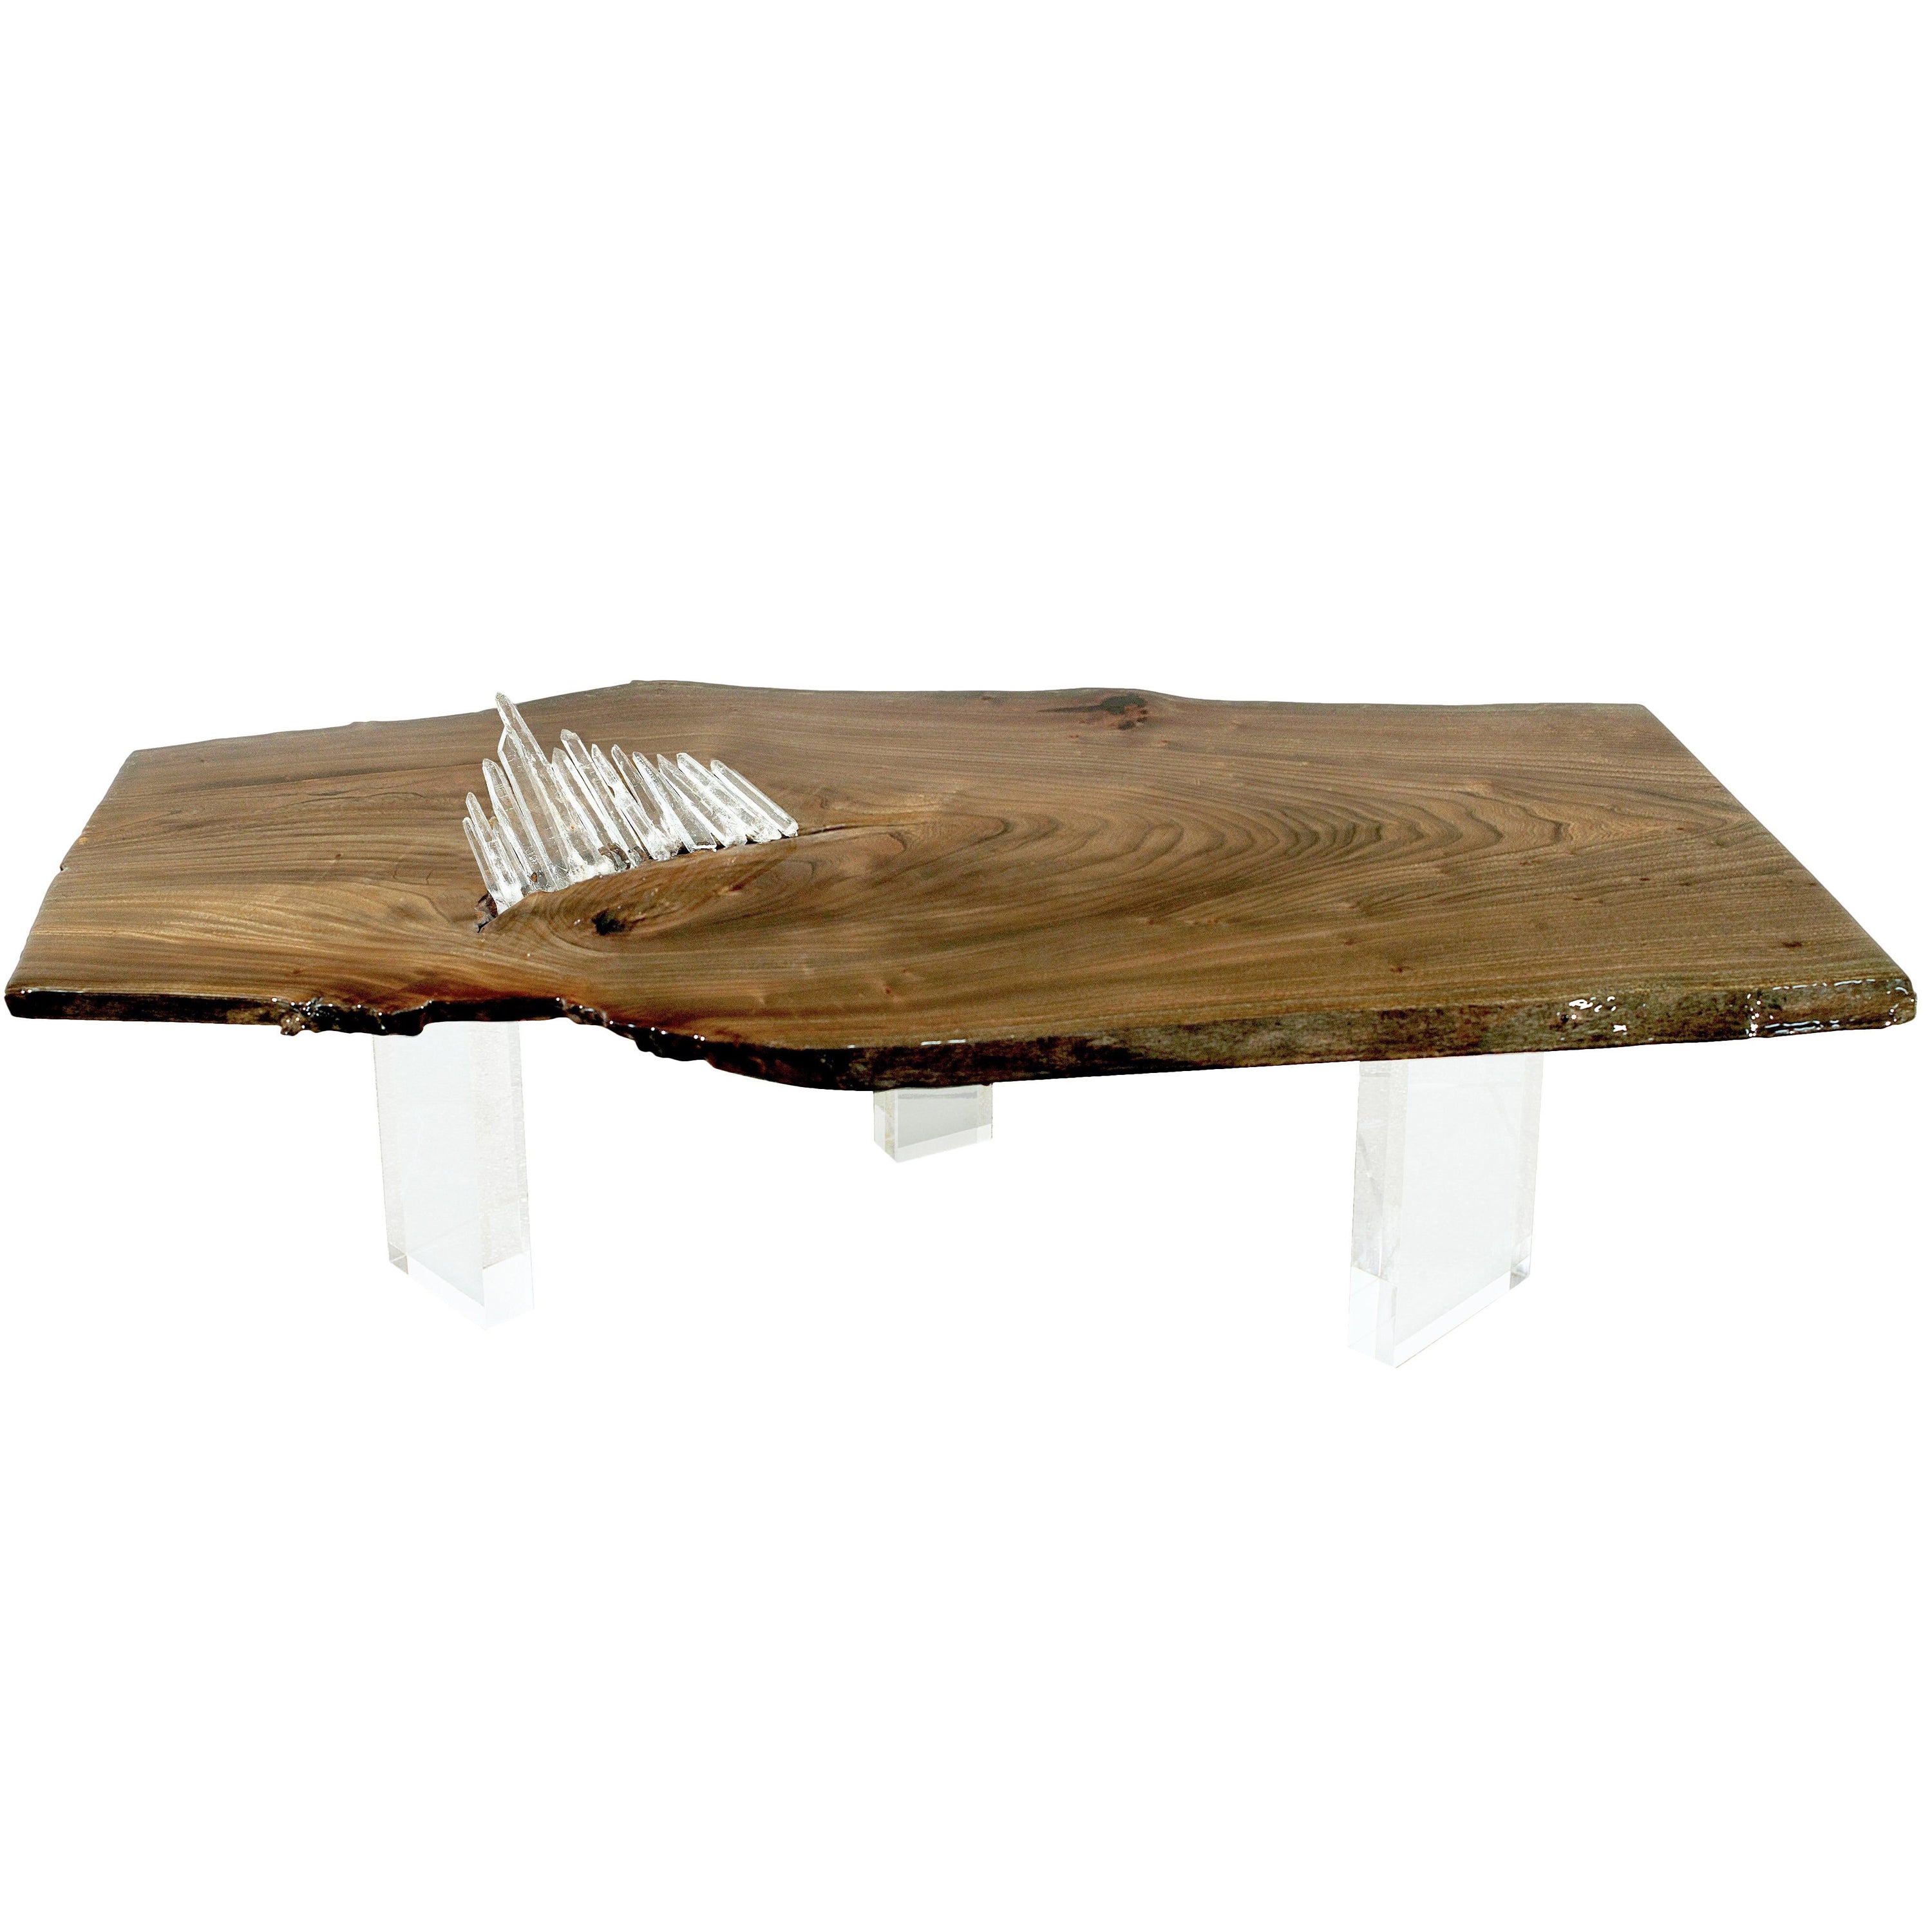 English Elm Wood Stained Coffee Table with Crystal Quartz Inlay by Danna Weiss